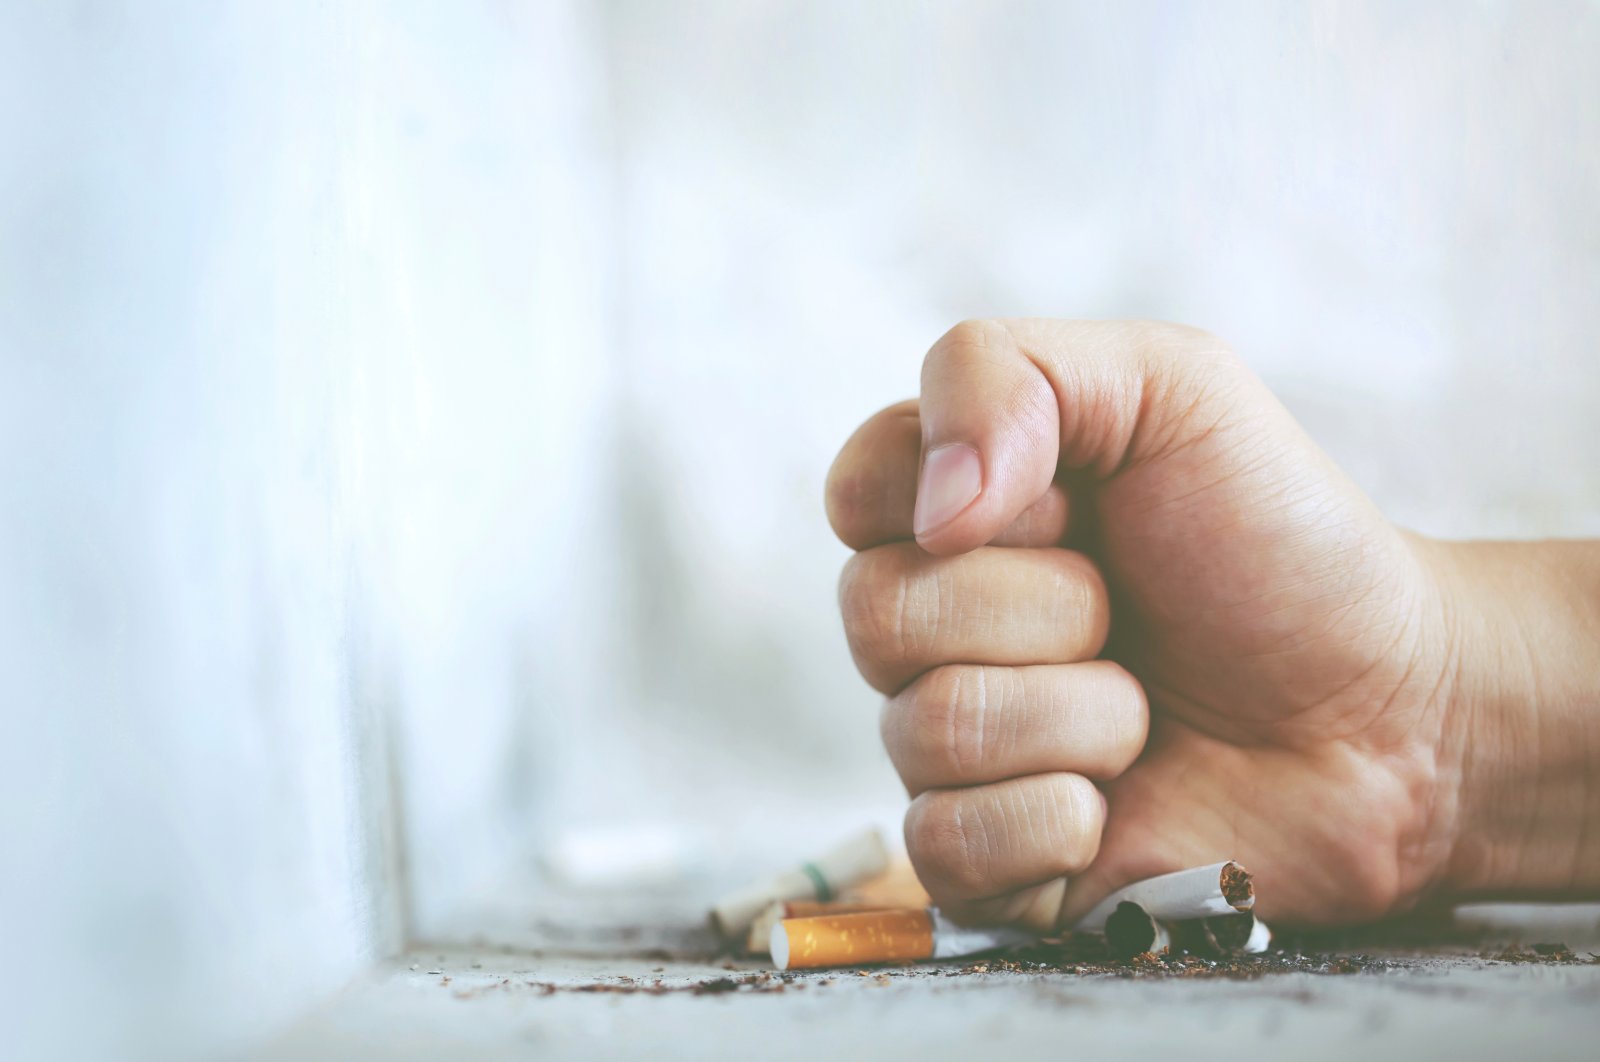 Individuals with low to moderate addiction levels are offered personalized smoking cessation plans, while those with more serious addictions are advised to get medical advice. (Shutterstock Photo)